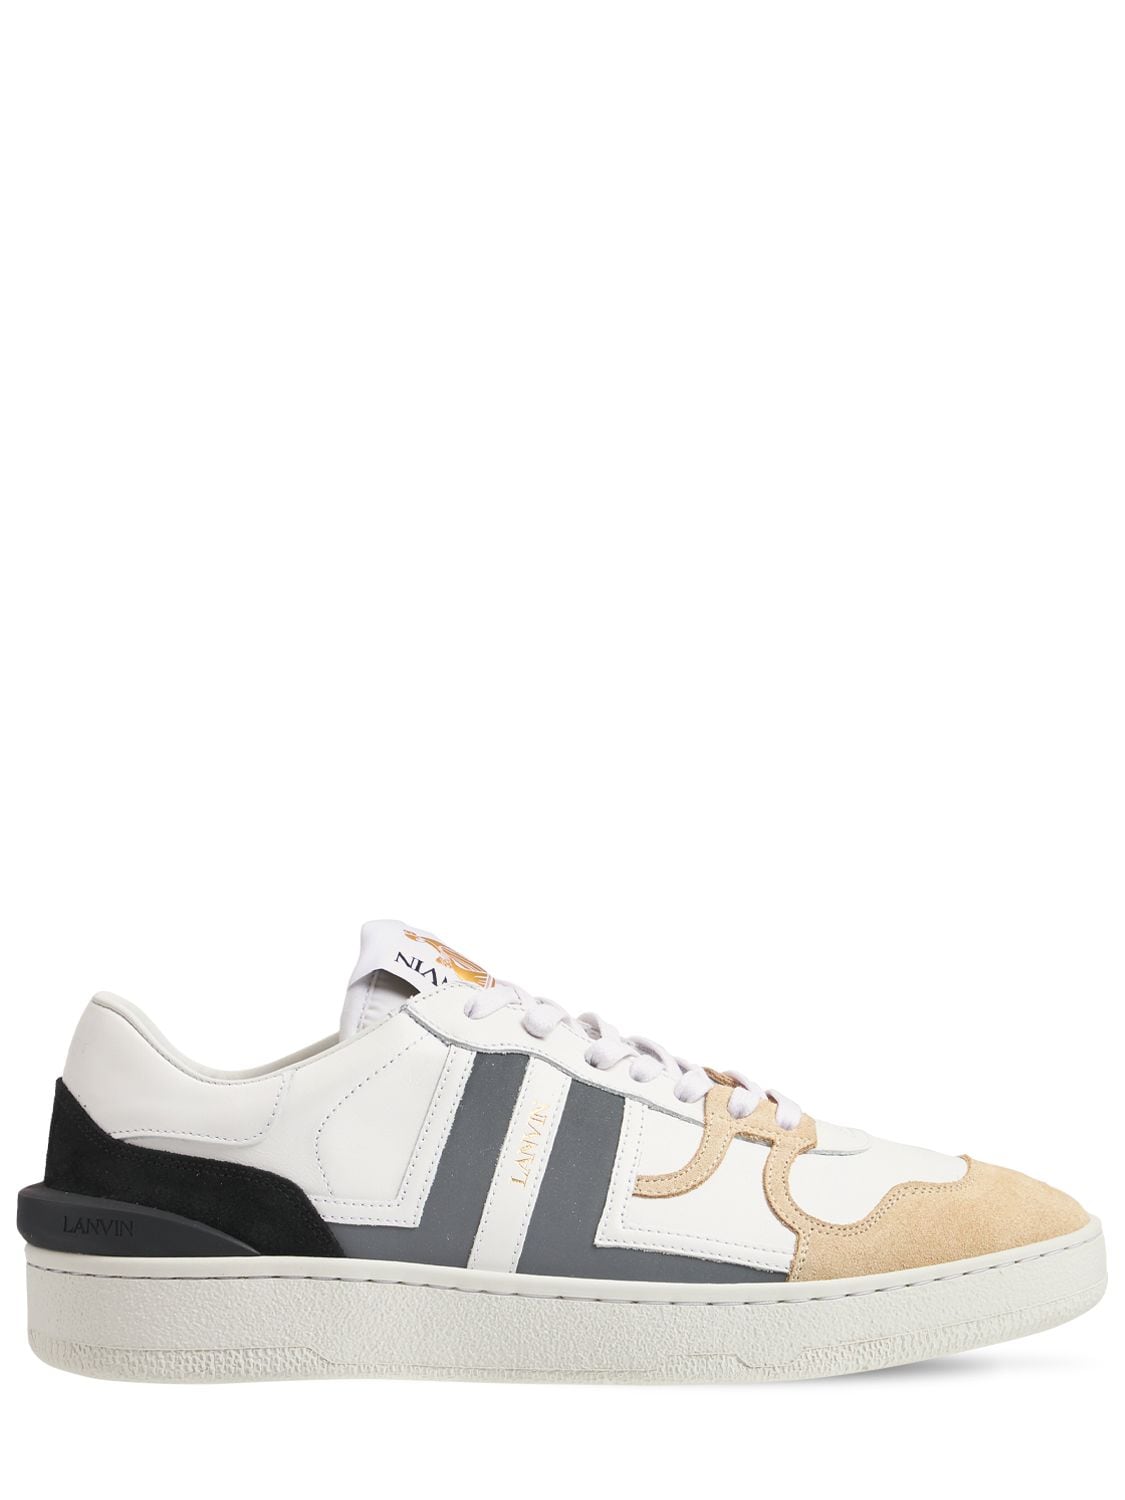 Lanvin - Clay low top lace-up sneakers - White/Silver | Luisaviaroma